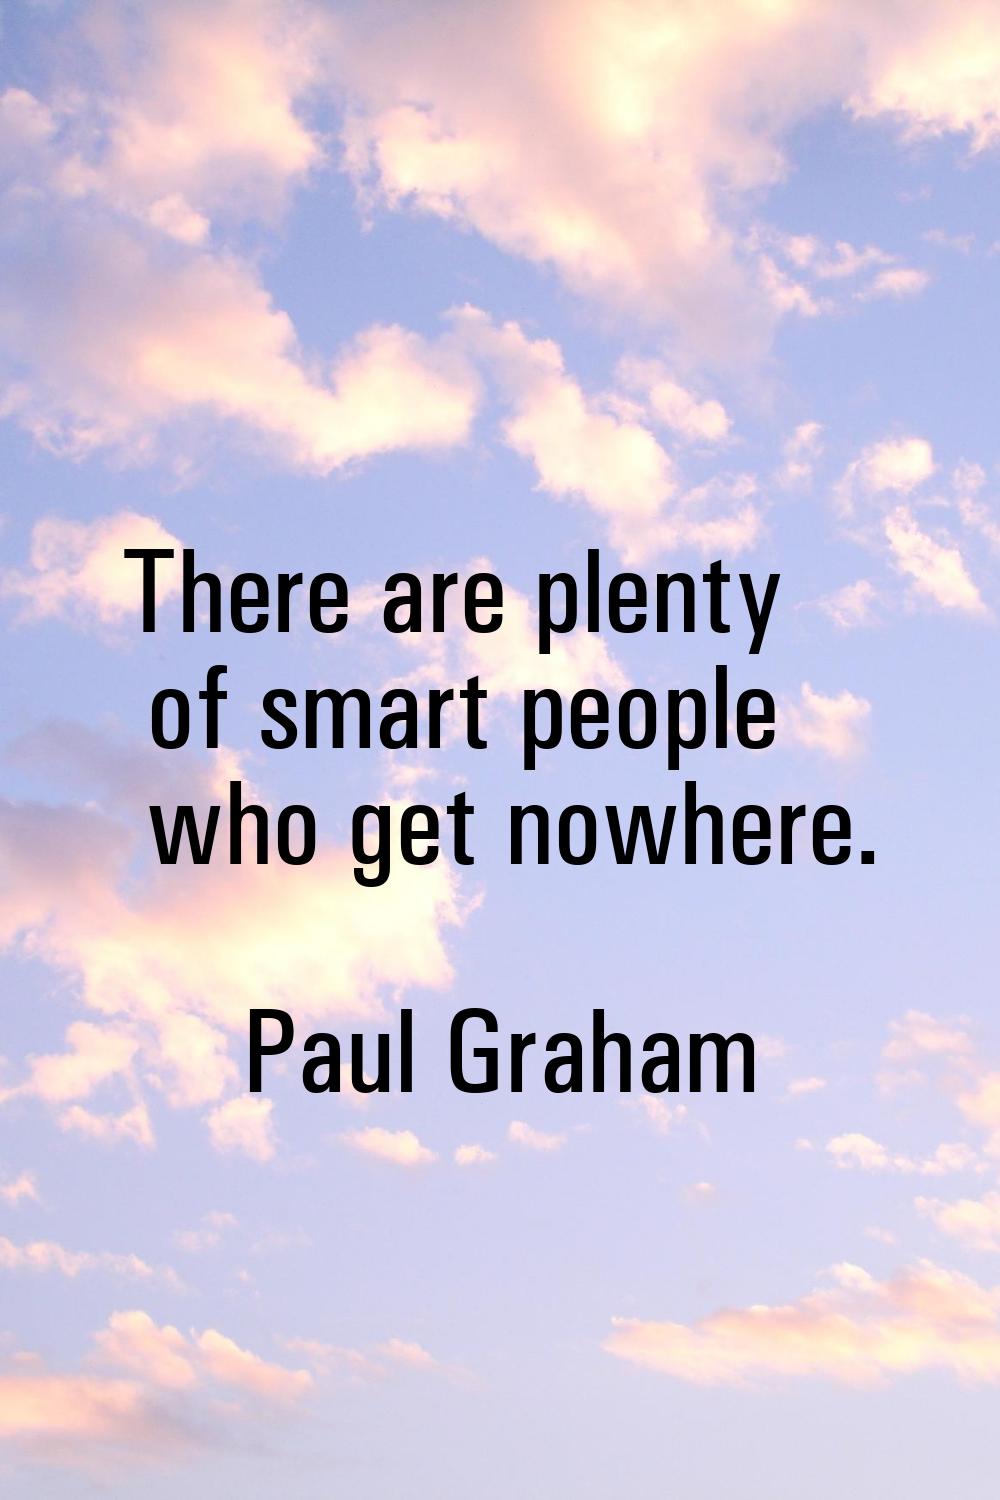 There are plenty of smart people who get nowhere.